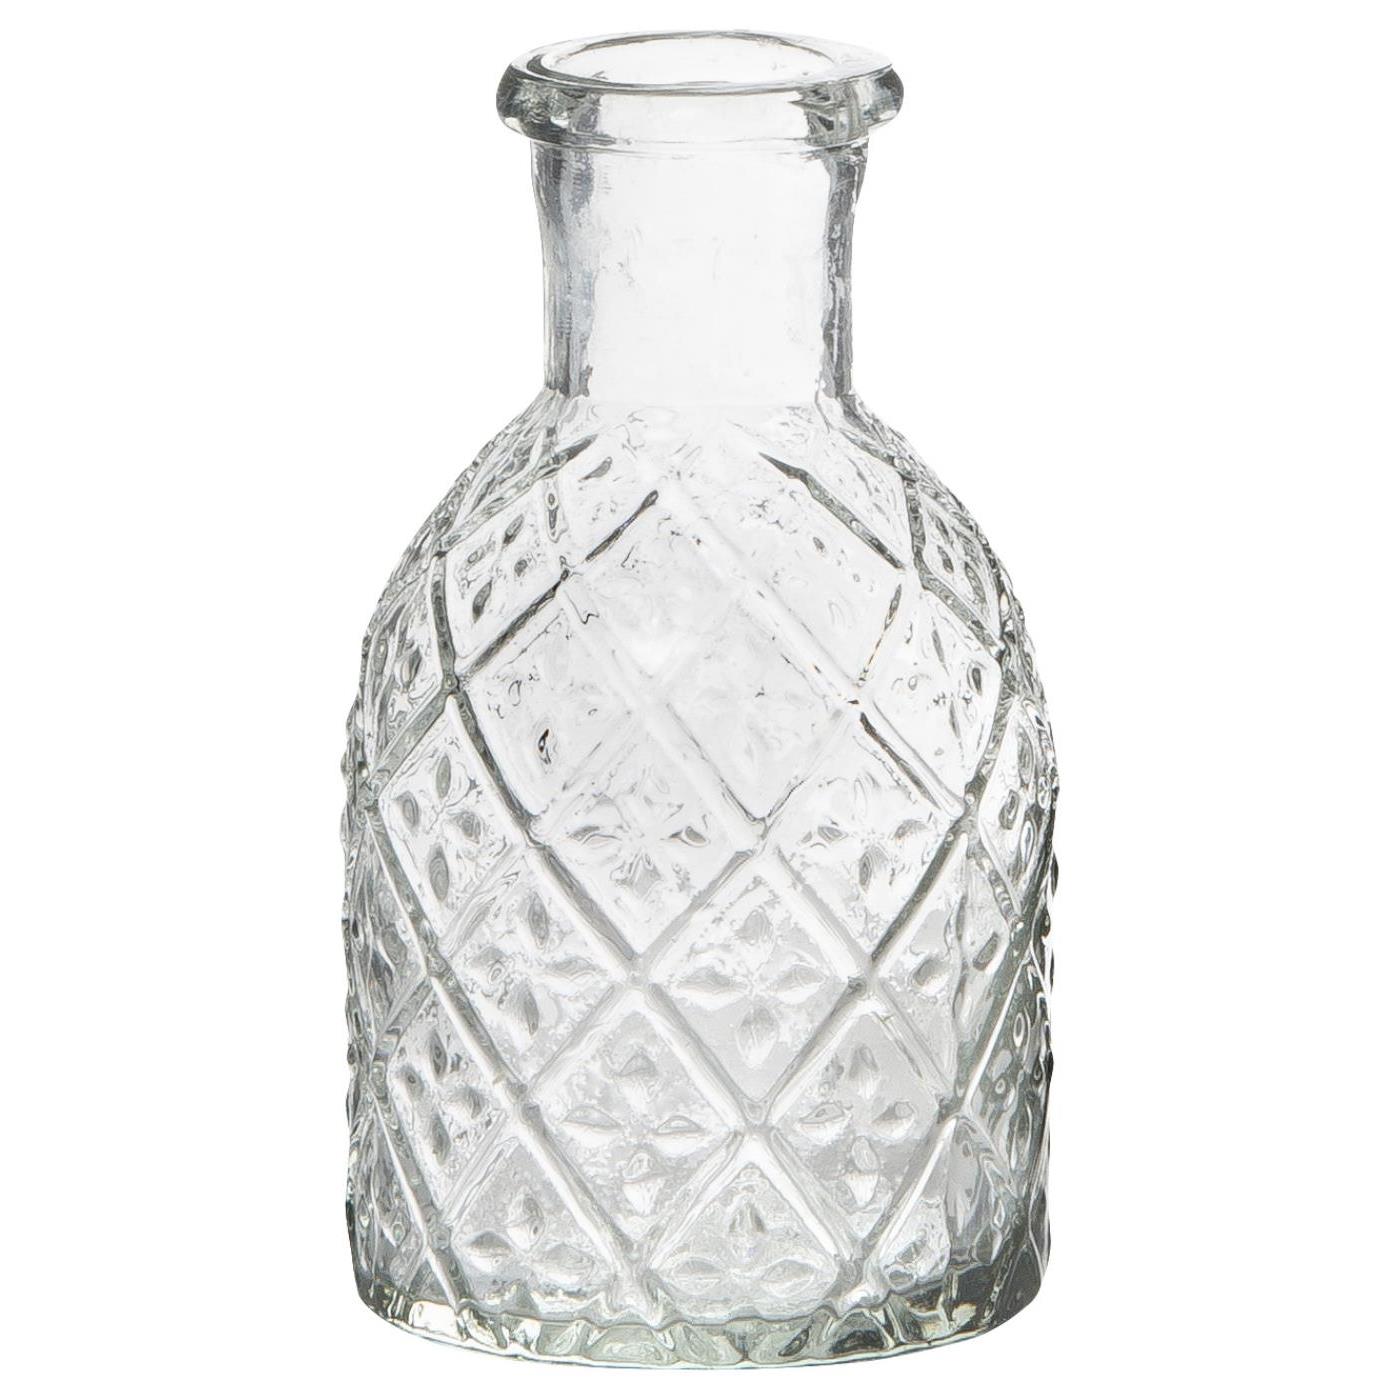 Pharmacy glass f/dinner candle harlequin pattern